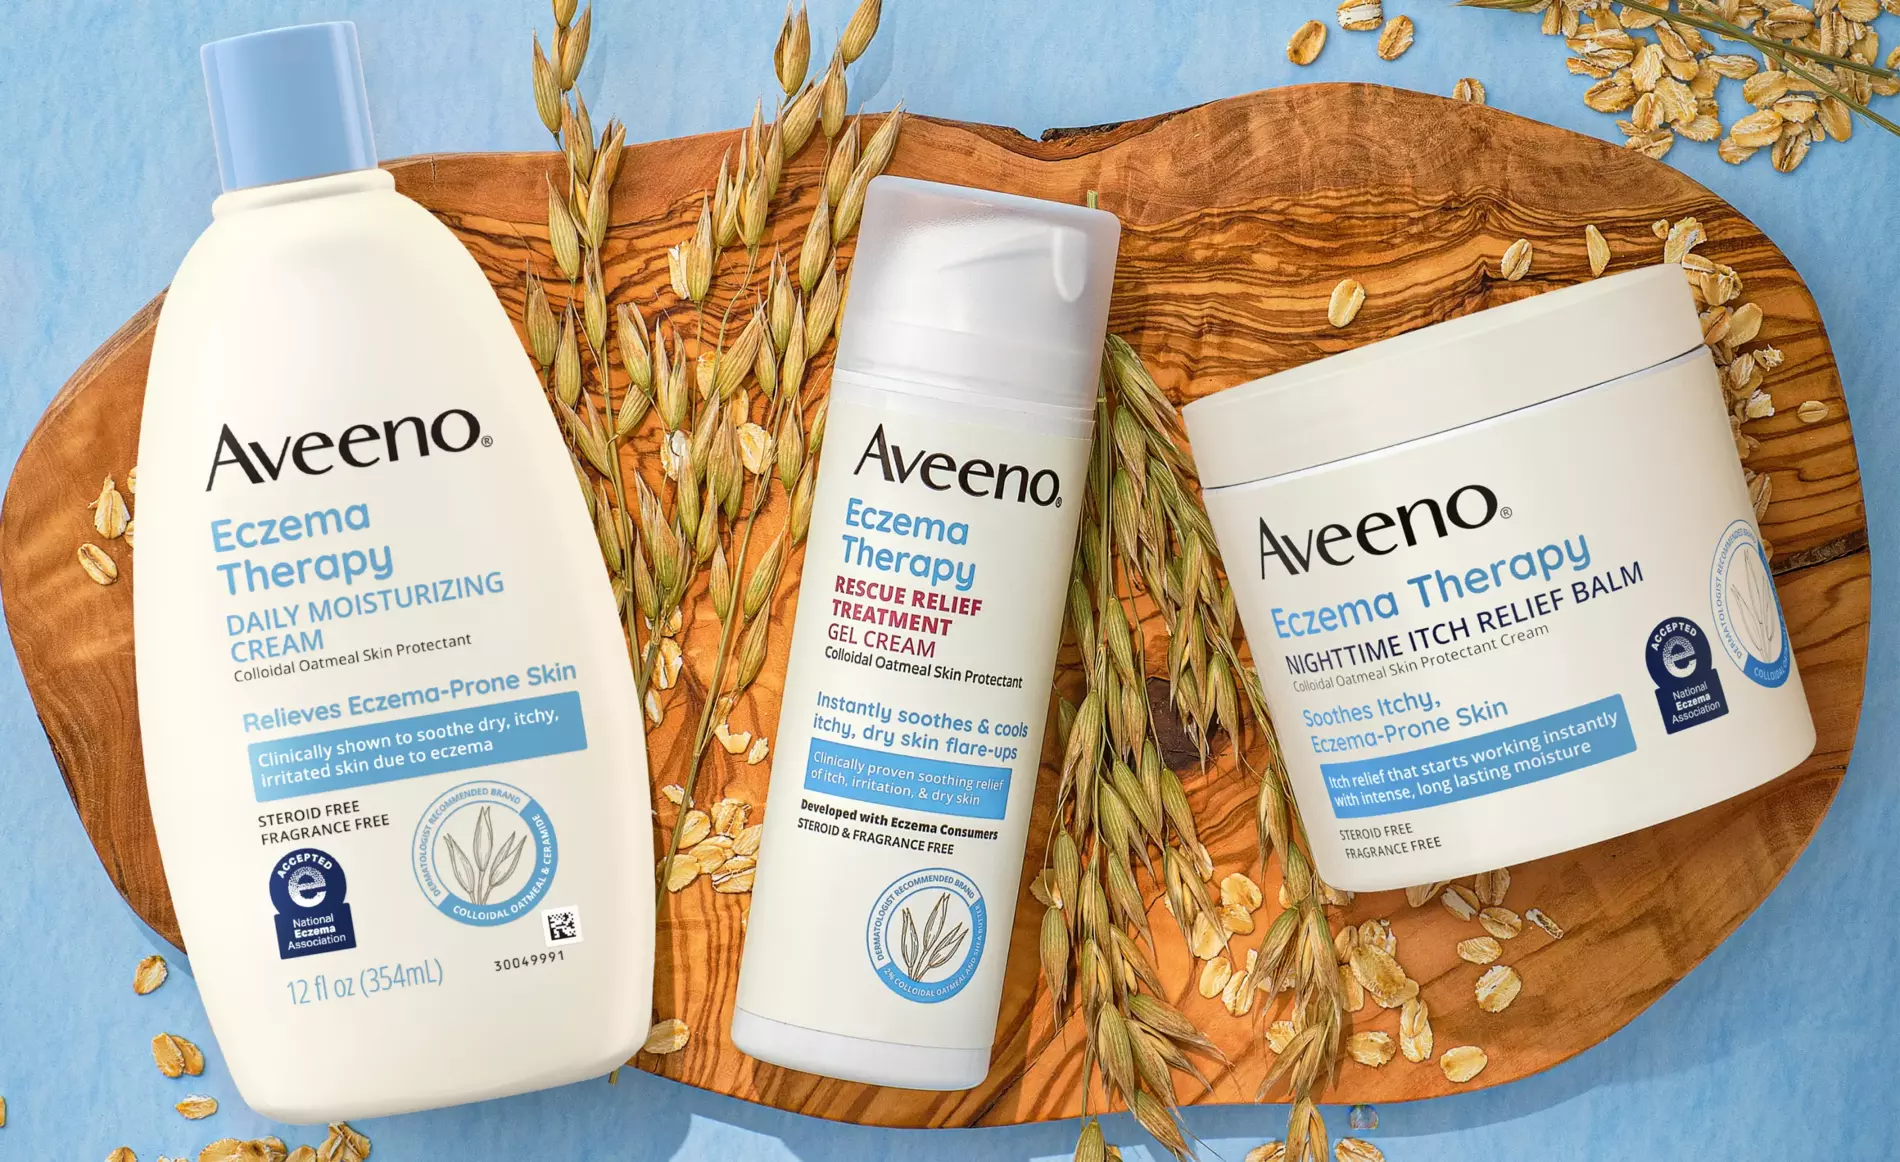 Aveeno Eczema Therapy Product Line Banner